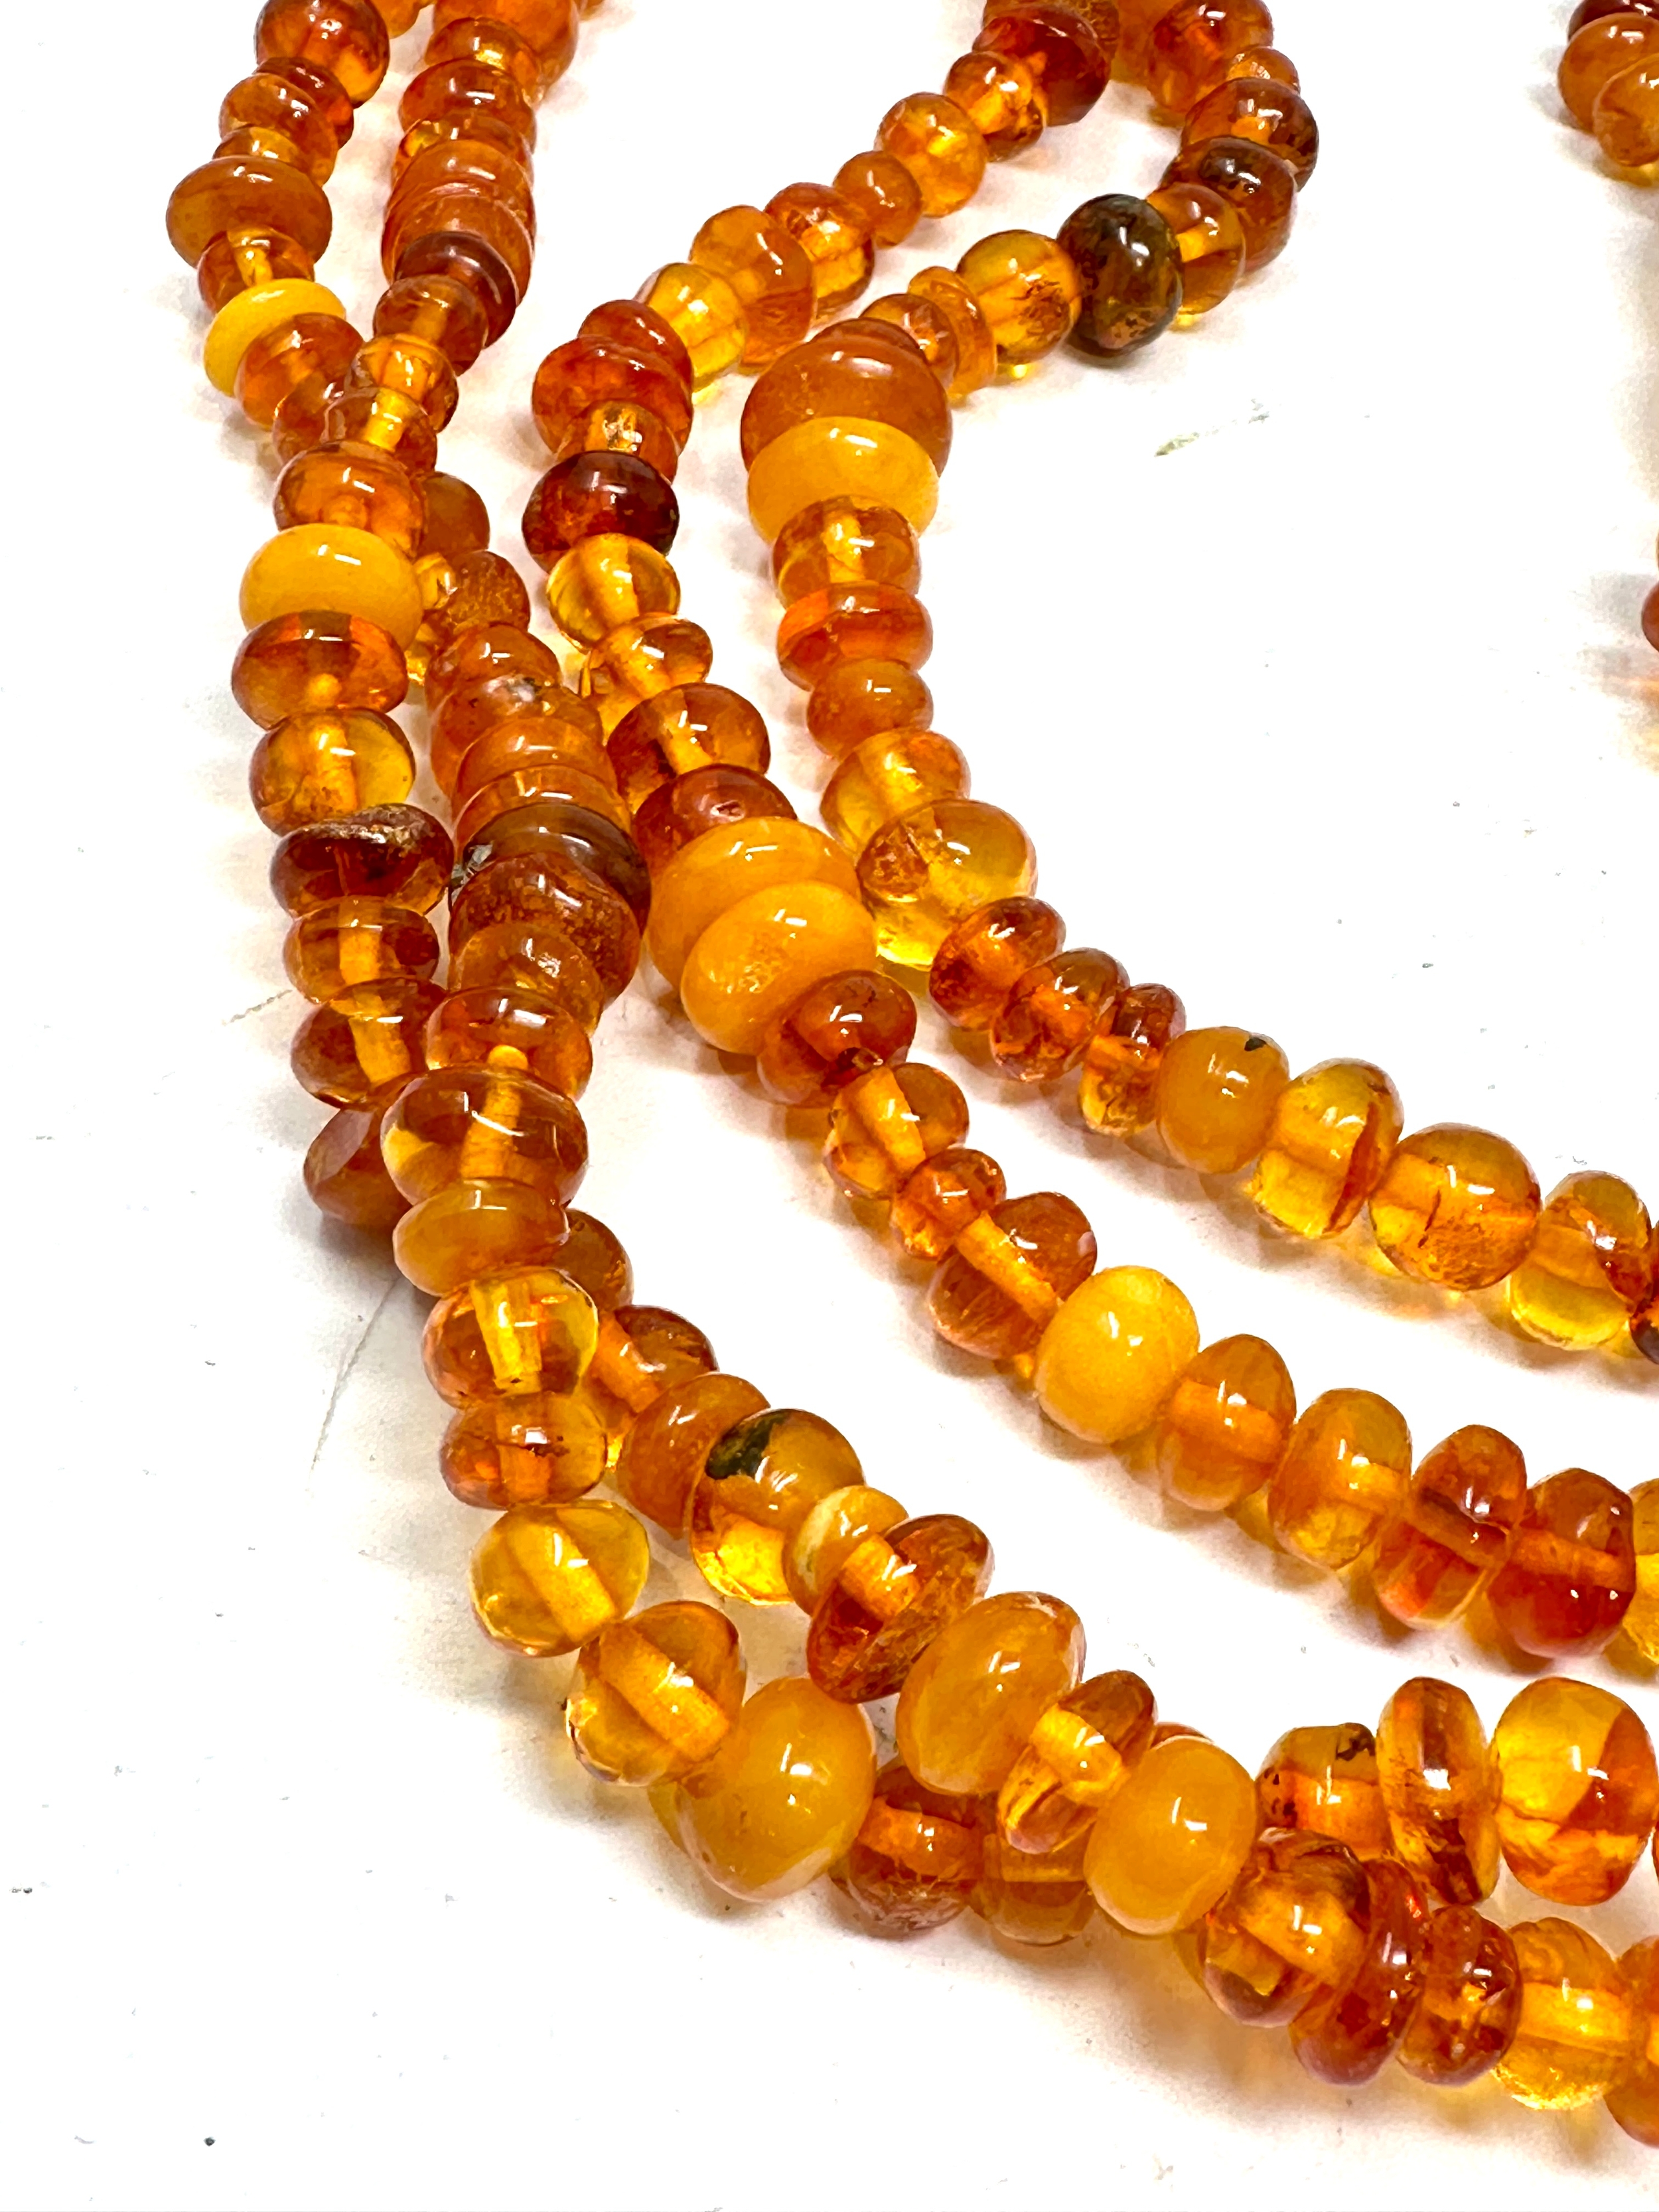 Amber jewellery necklace weight 107g - Image 2 of 5